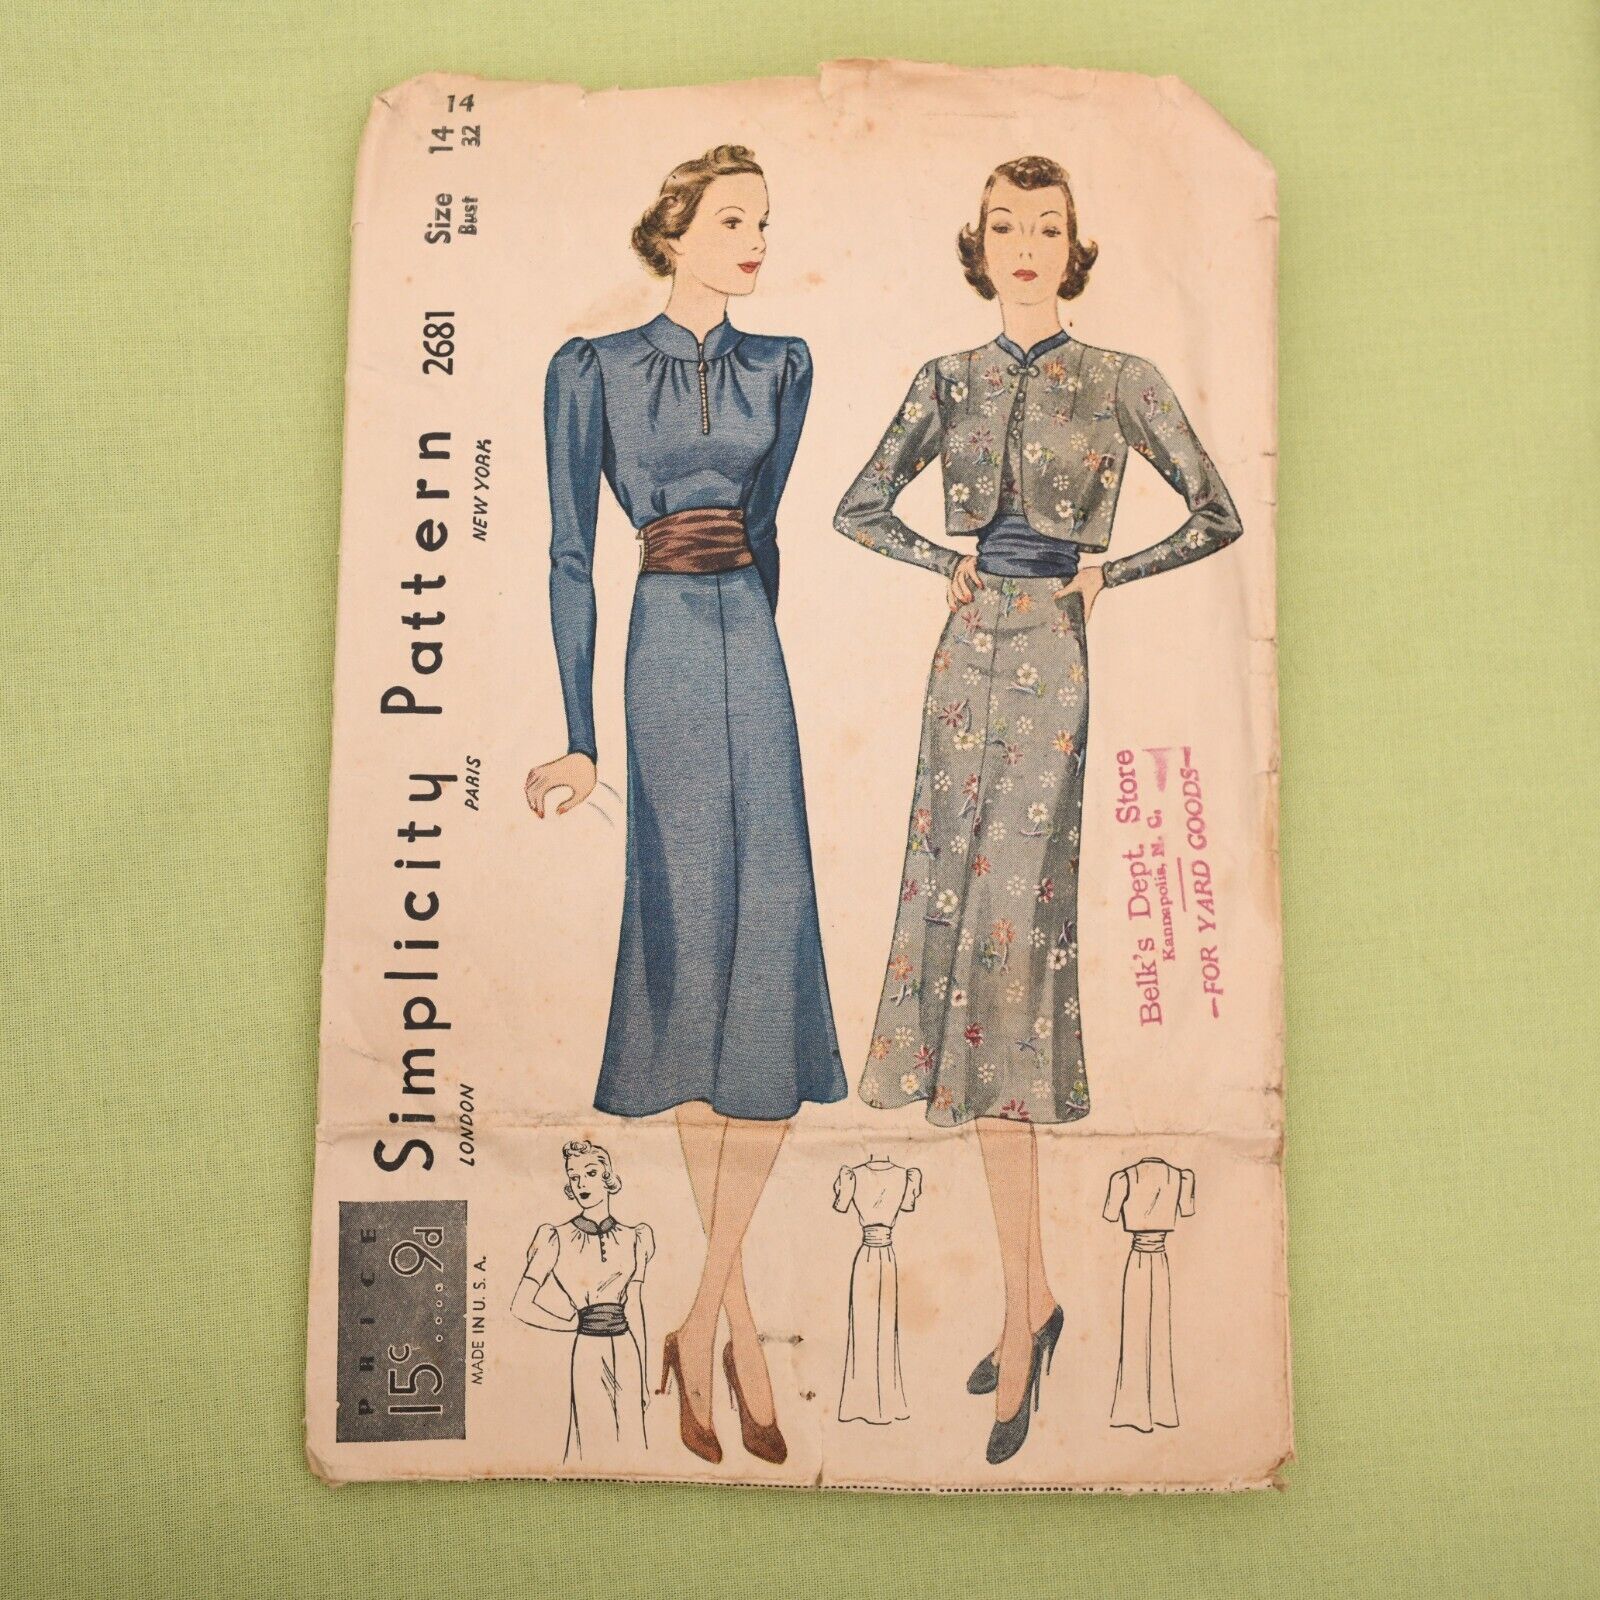 Vintage 1930s Simplicity Dress & Bolero Sewing Pattern - 2681 Bust 32 Complete